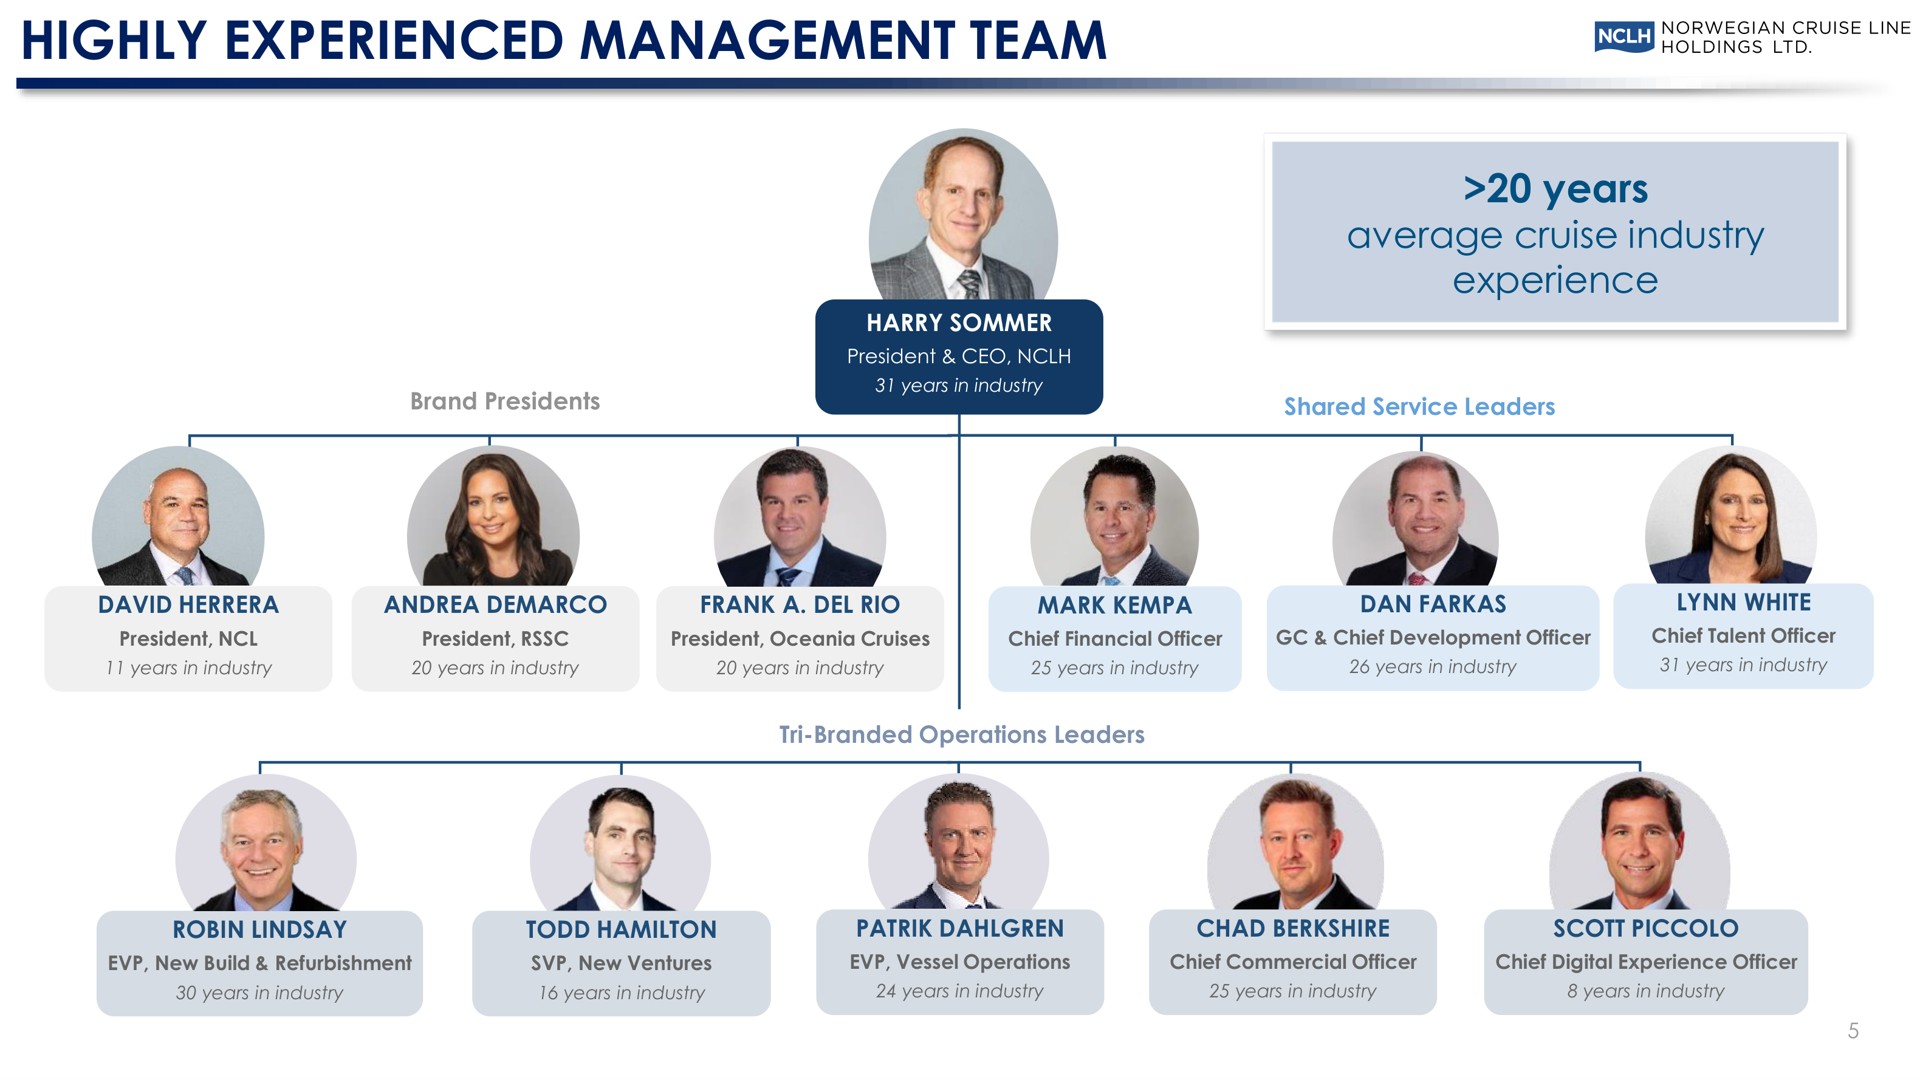 highly experienced management team years average cruise industry experience line be | Norwegian Cruise Line